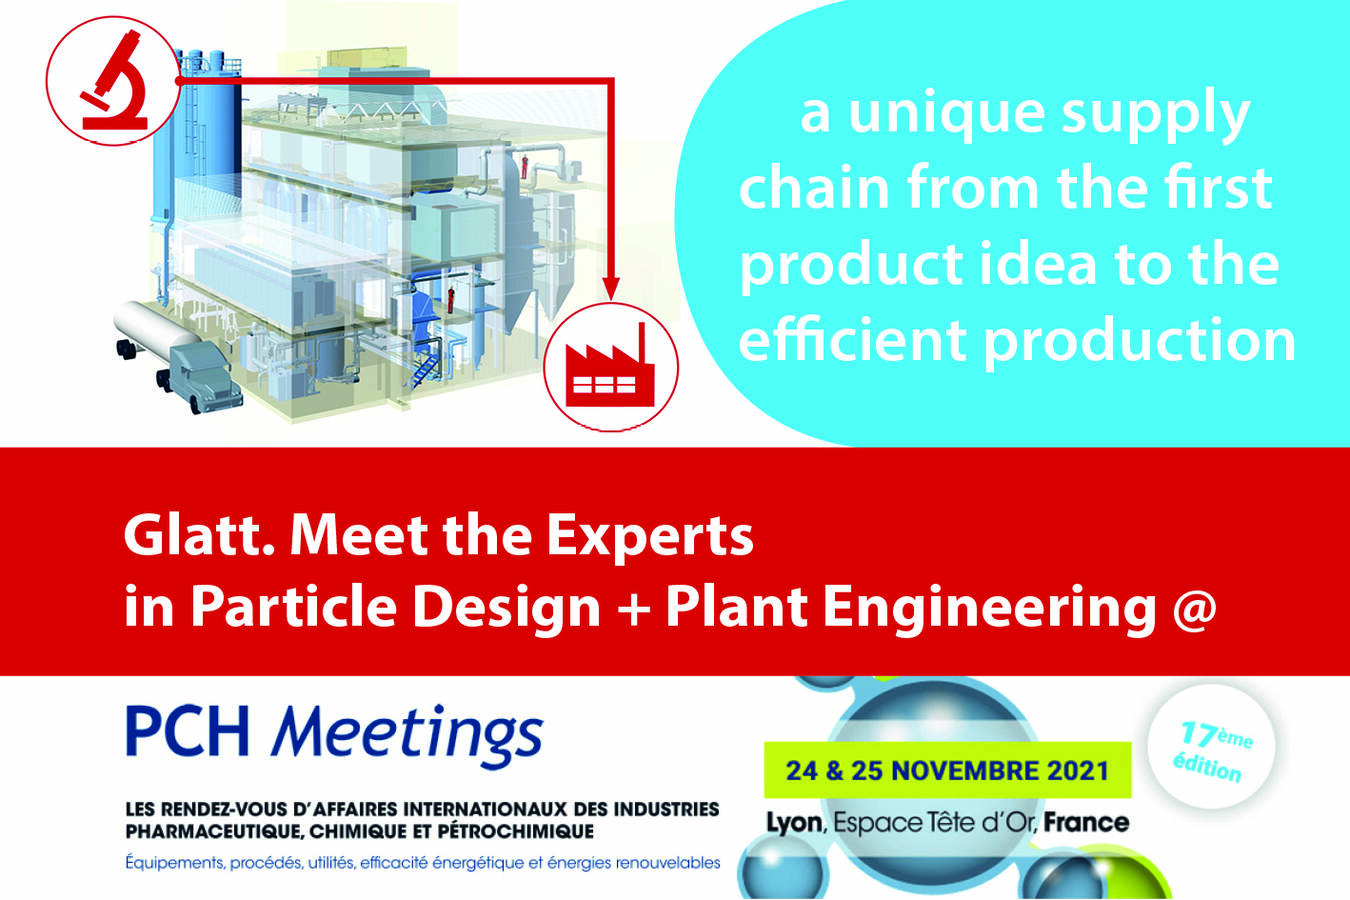 Meet the Glatt Experts for Particle Design + Plant Engineering at the PCH Meetings 2021